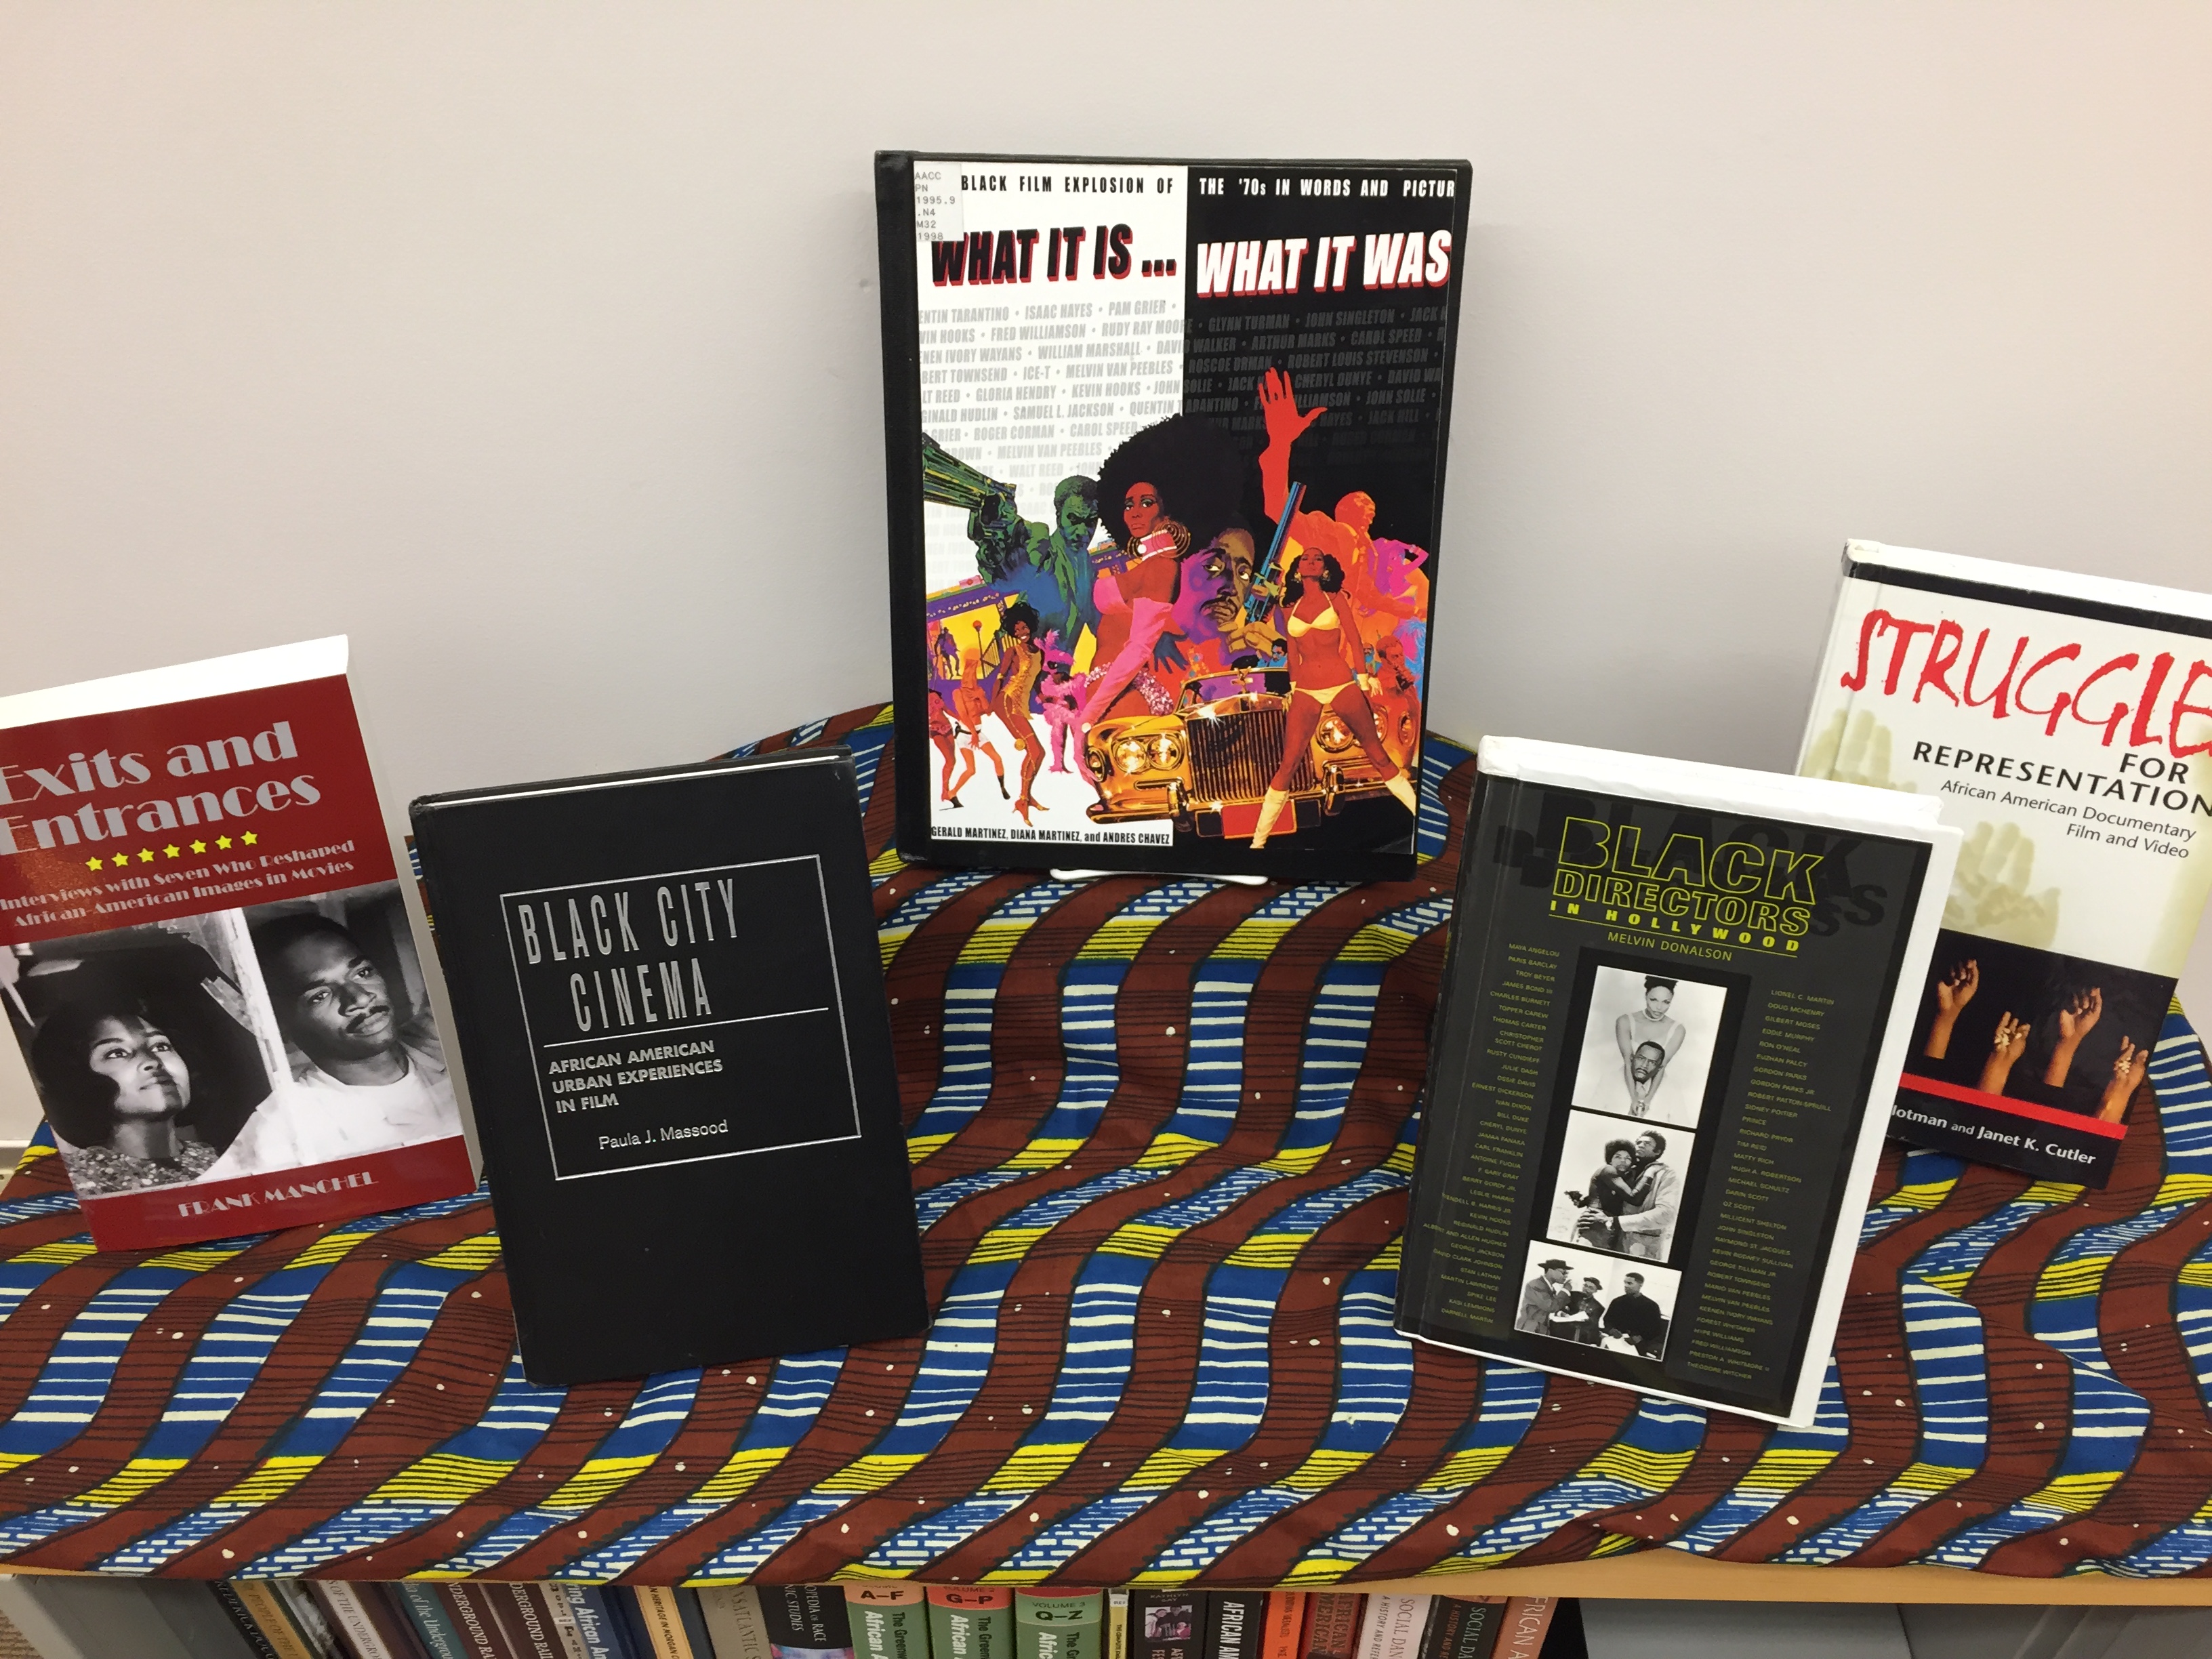 Image of books on display at the NMBCC Library